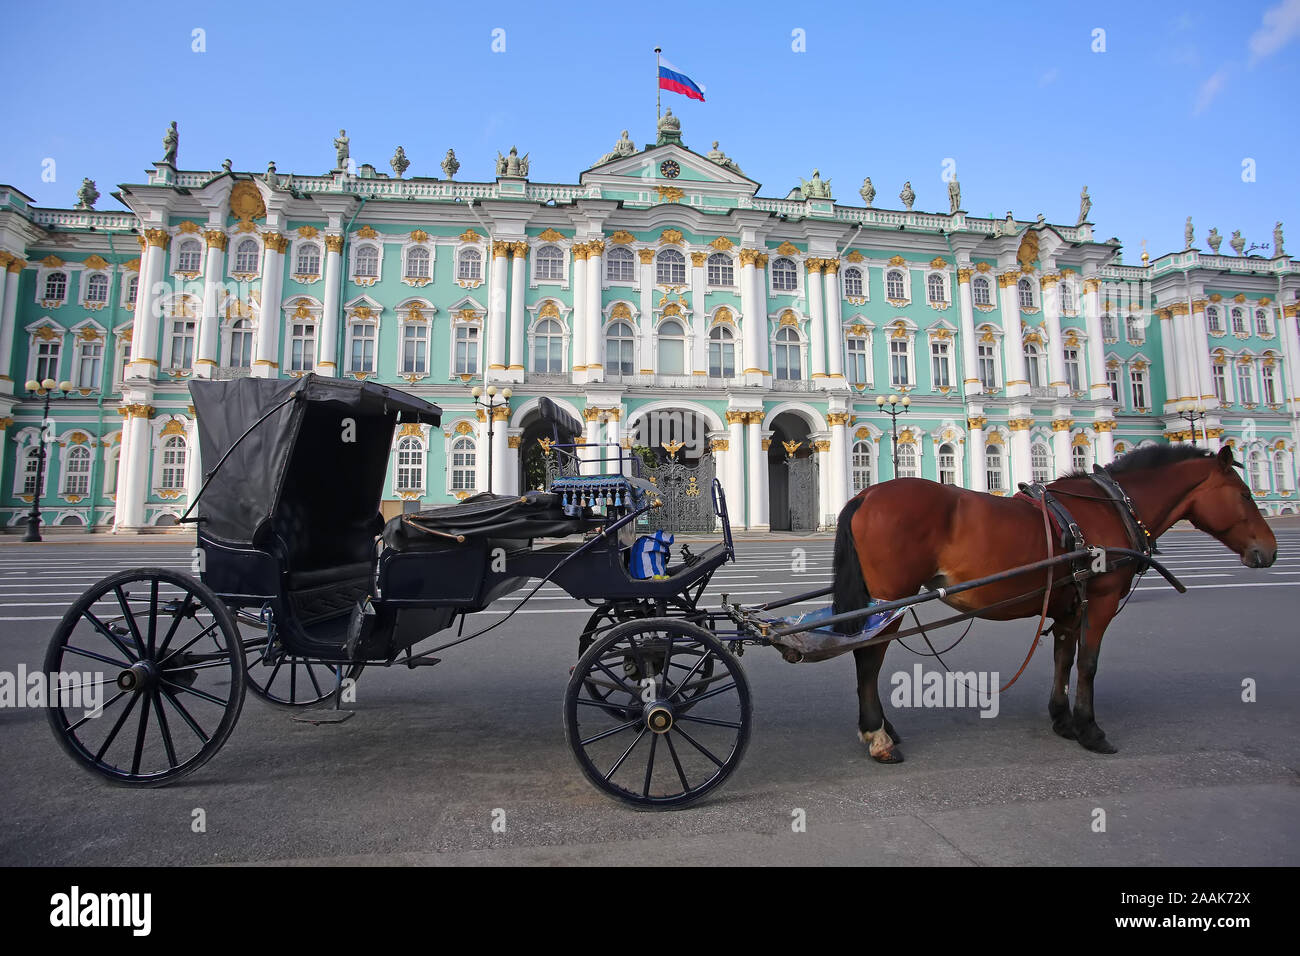 A horse & carriage waiting in Palace Square, which is the central square, and the Hermitage museum or Winter Palace in the background, St Petersburg, Stock Photo